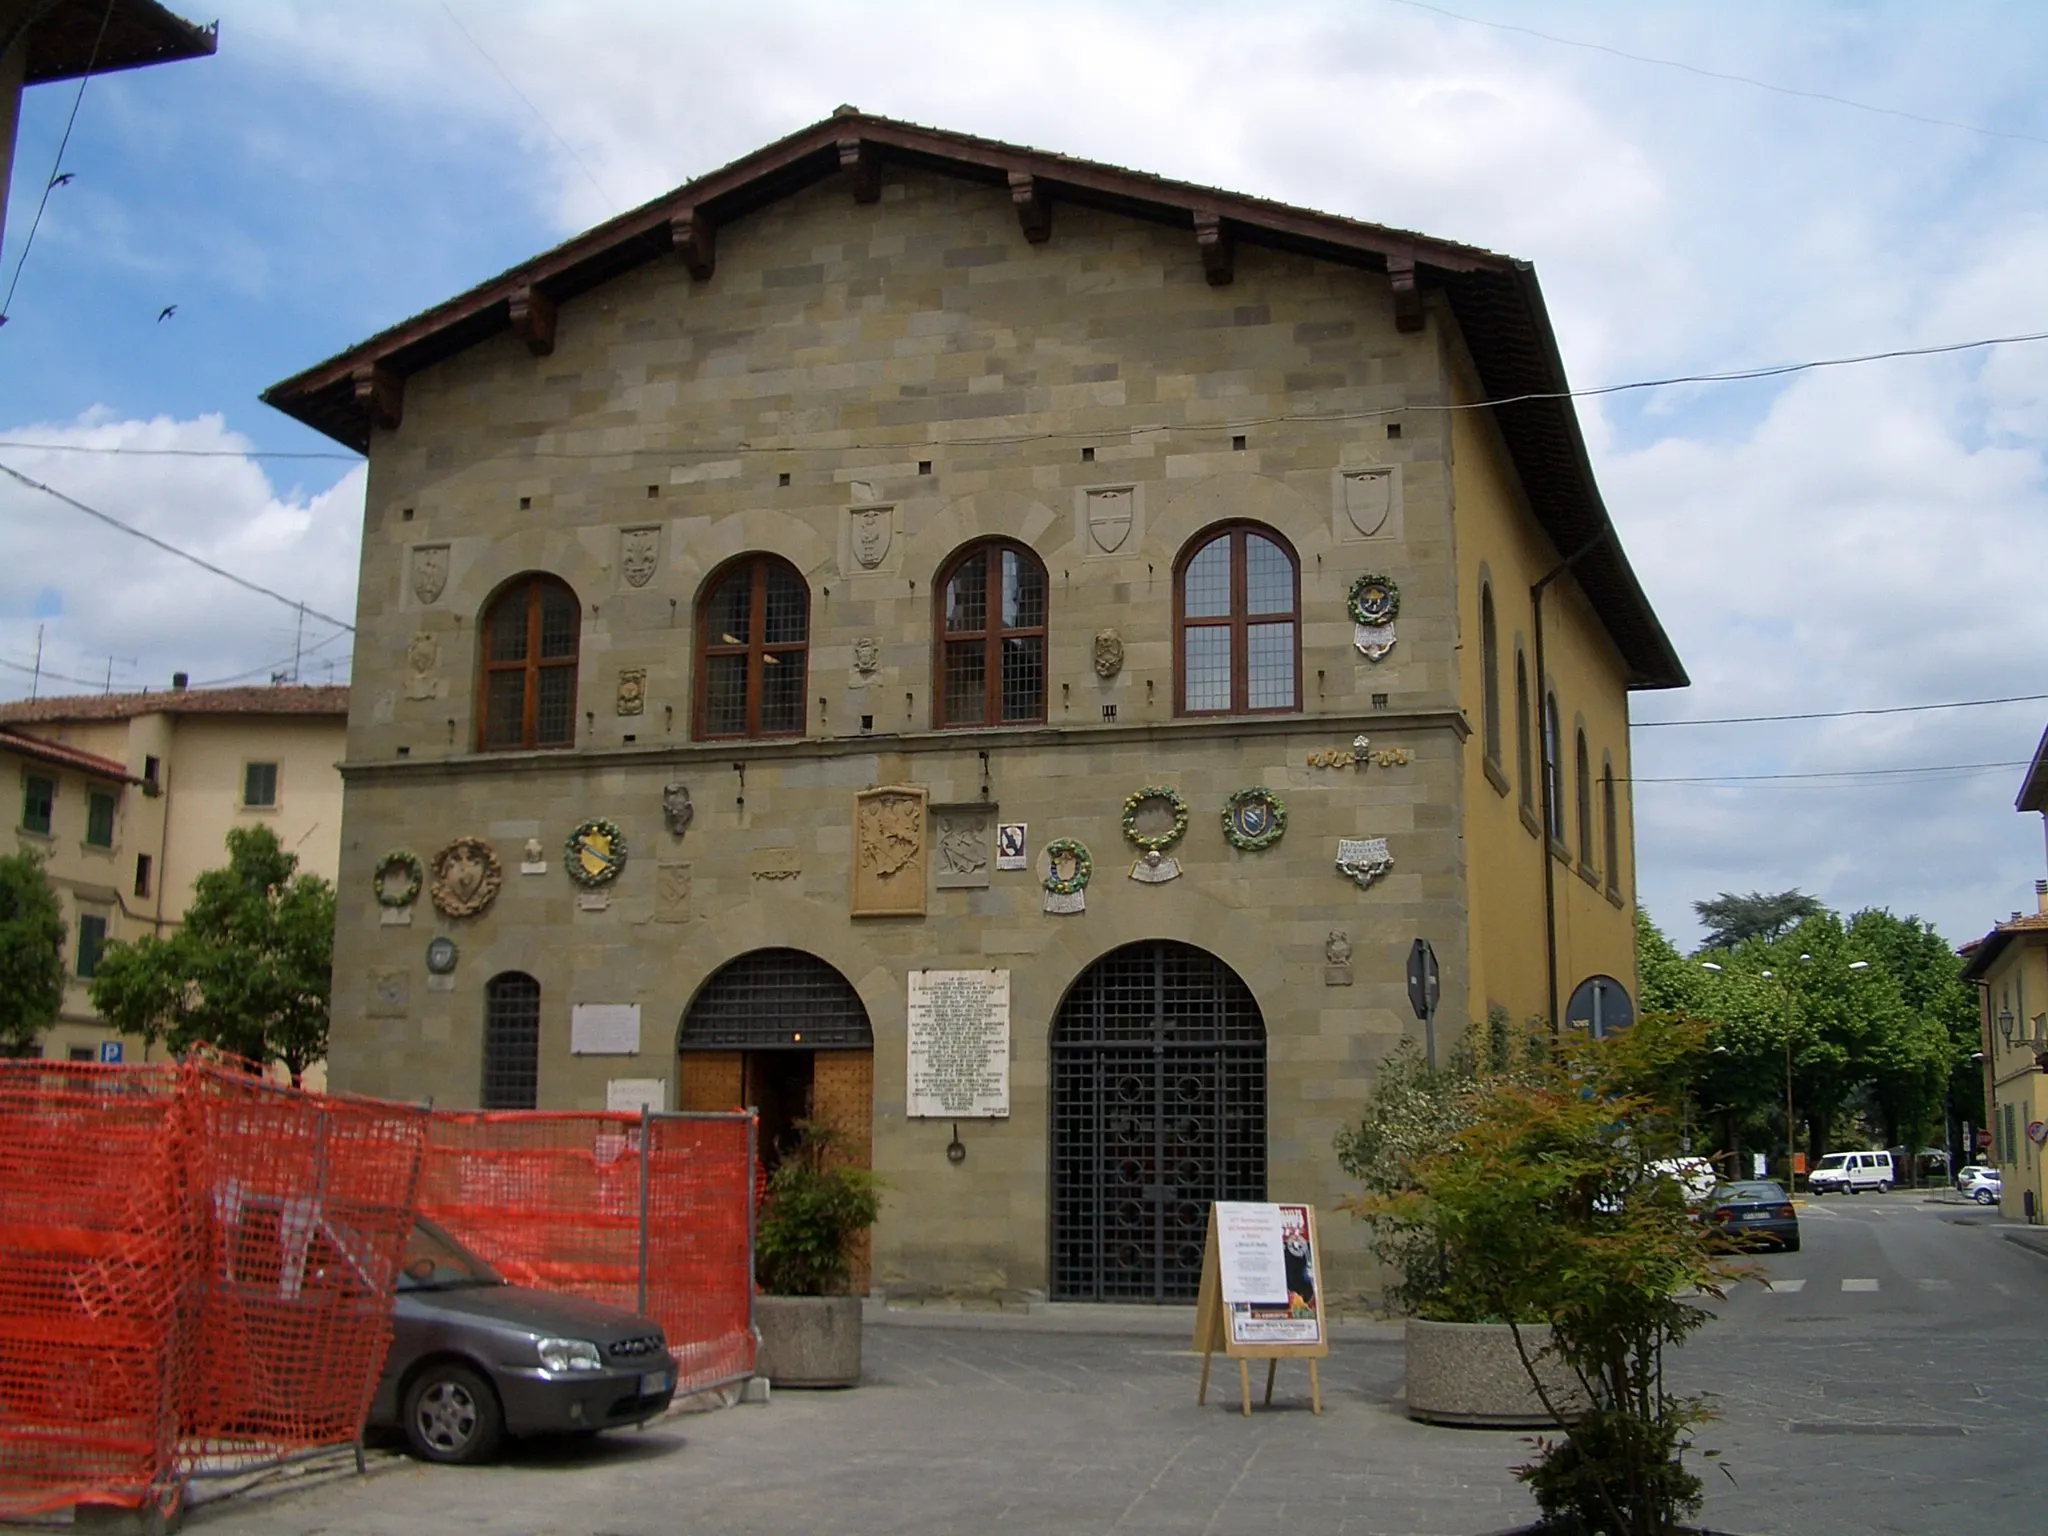 Photo showing: The public library in the town Borgo San Lorenzo, Tuscany